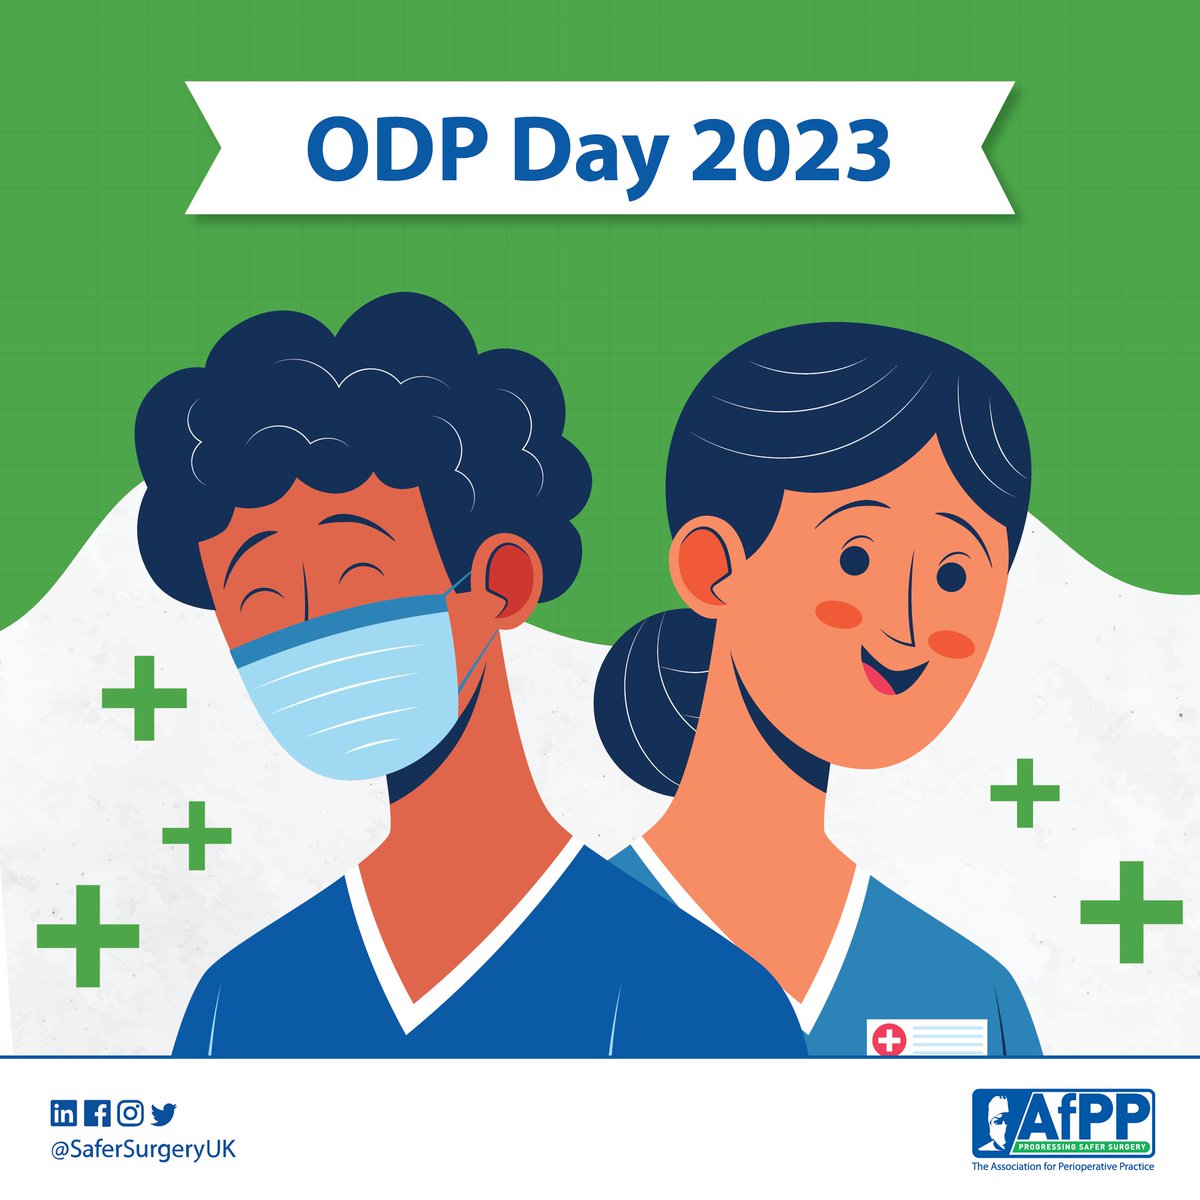 Happy #ODPDay!🎉 Today, we celebrate all Operating Department Practitioners for their crucial role in providing safe and efficient surgical care every day. Being an ODP is the most rewarding job you've probably never heard of! Thank you for all that you do!💚 #SaferSurgery